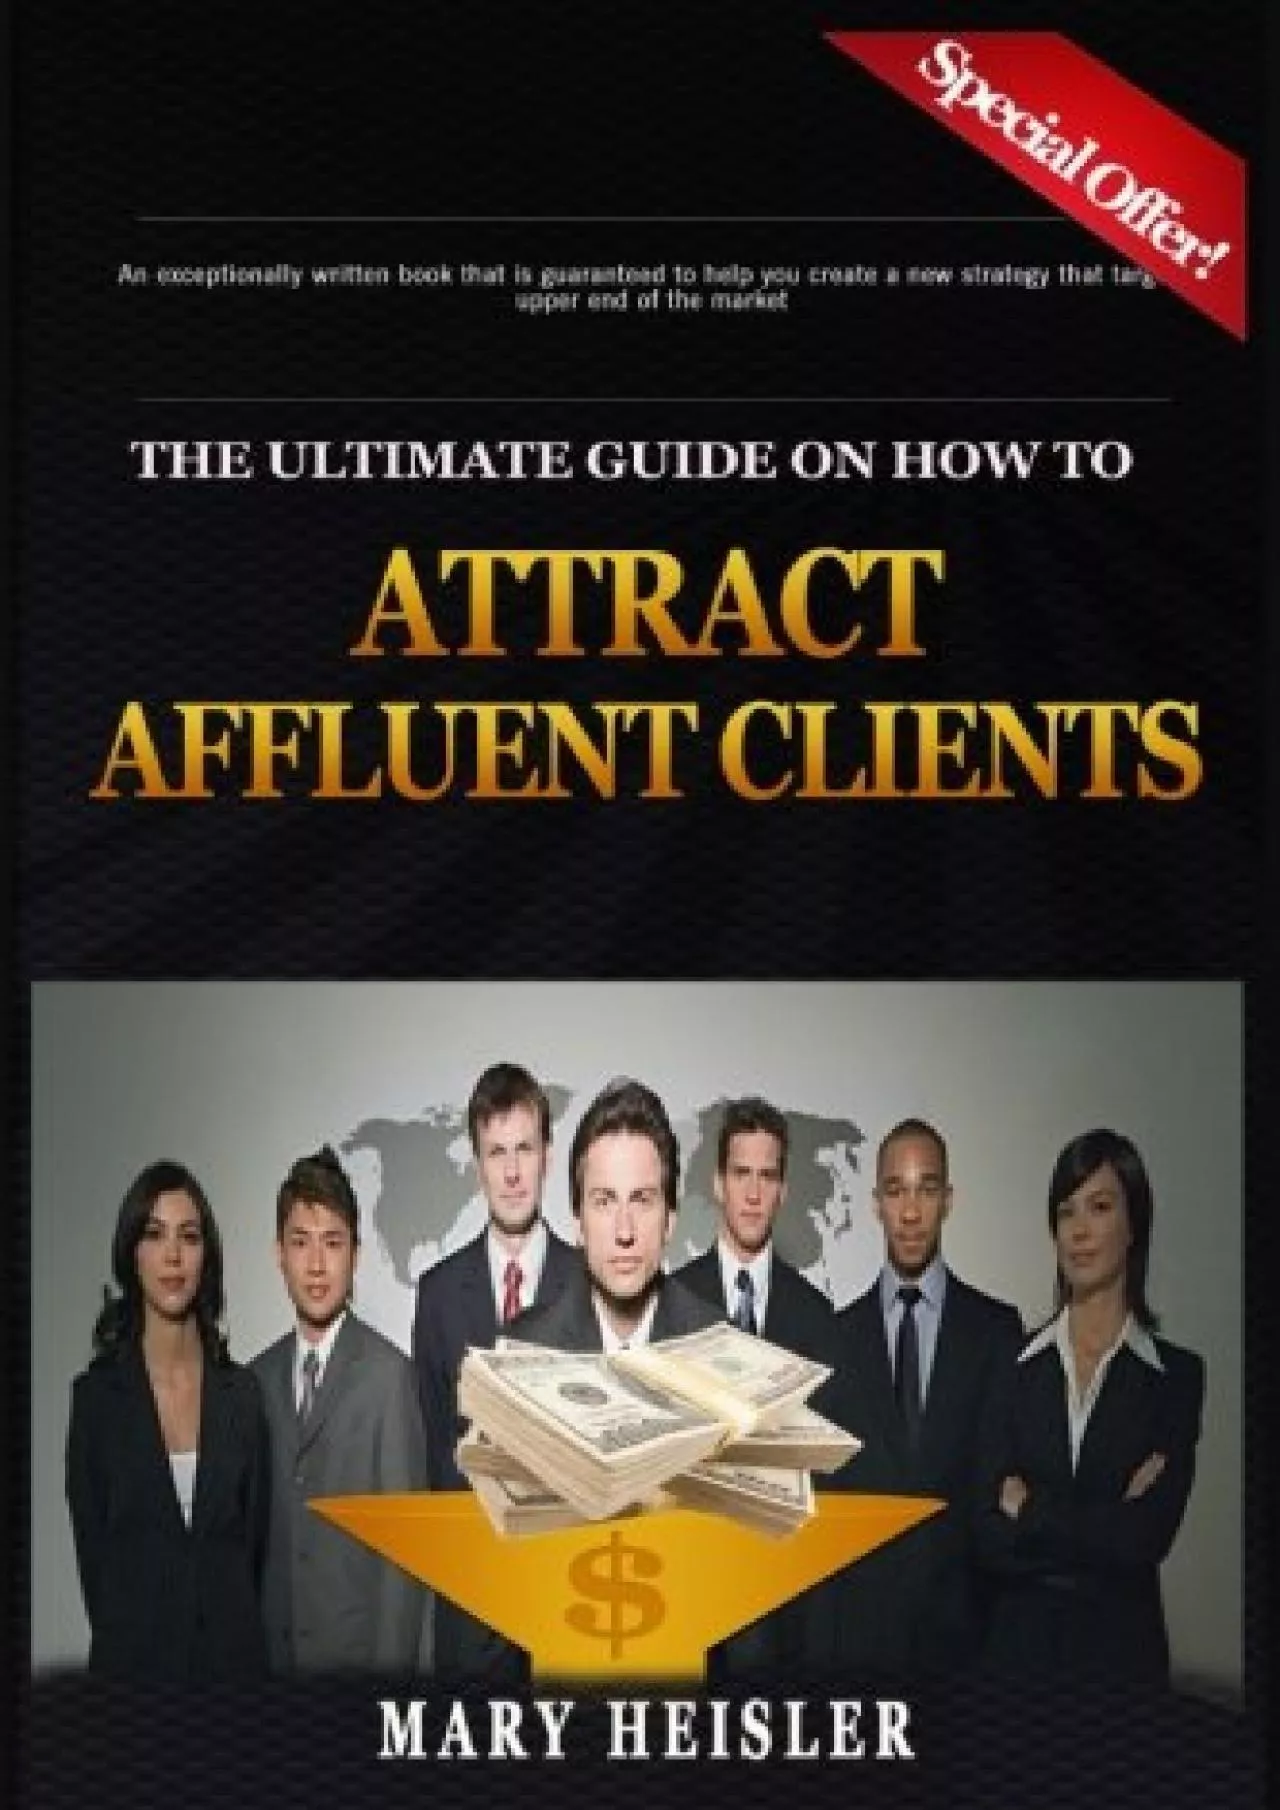 (DOWNLOAD)-The Ultimate Guide on How To Attract Affluent Clients: Creating a new strategy